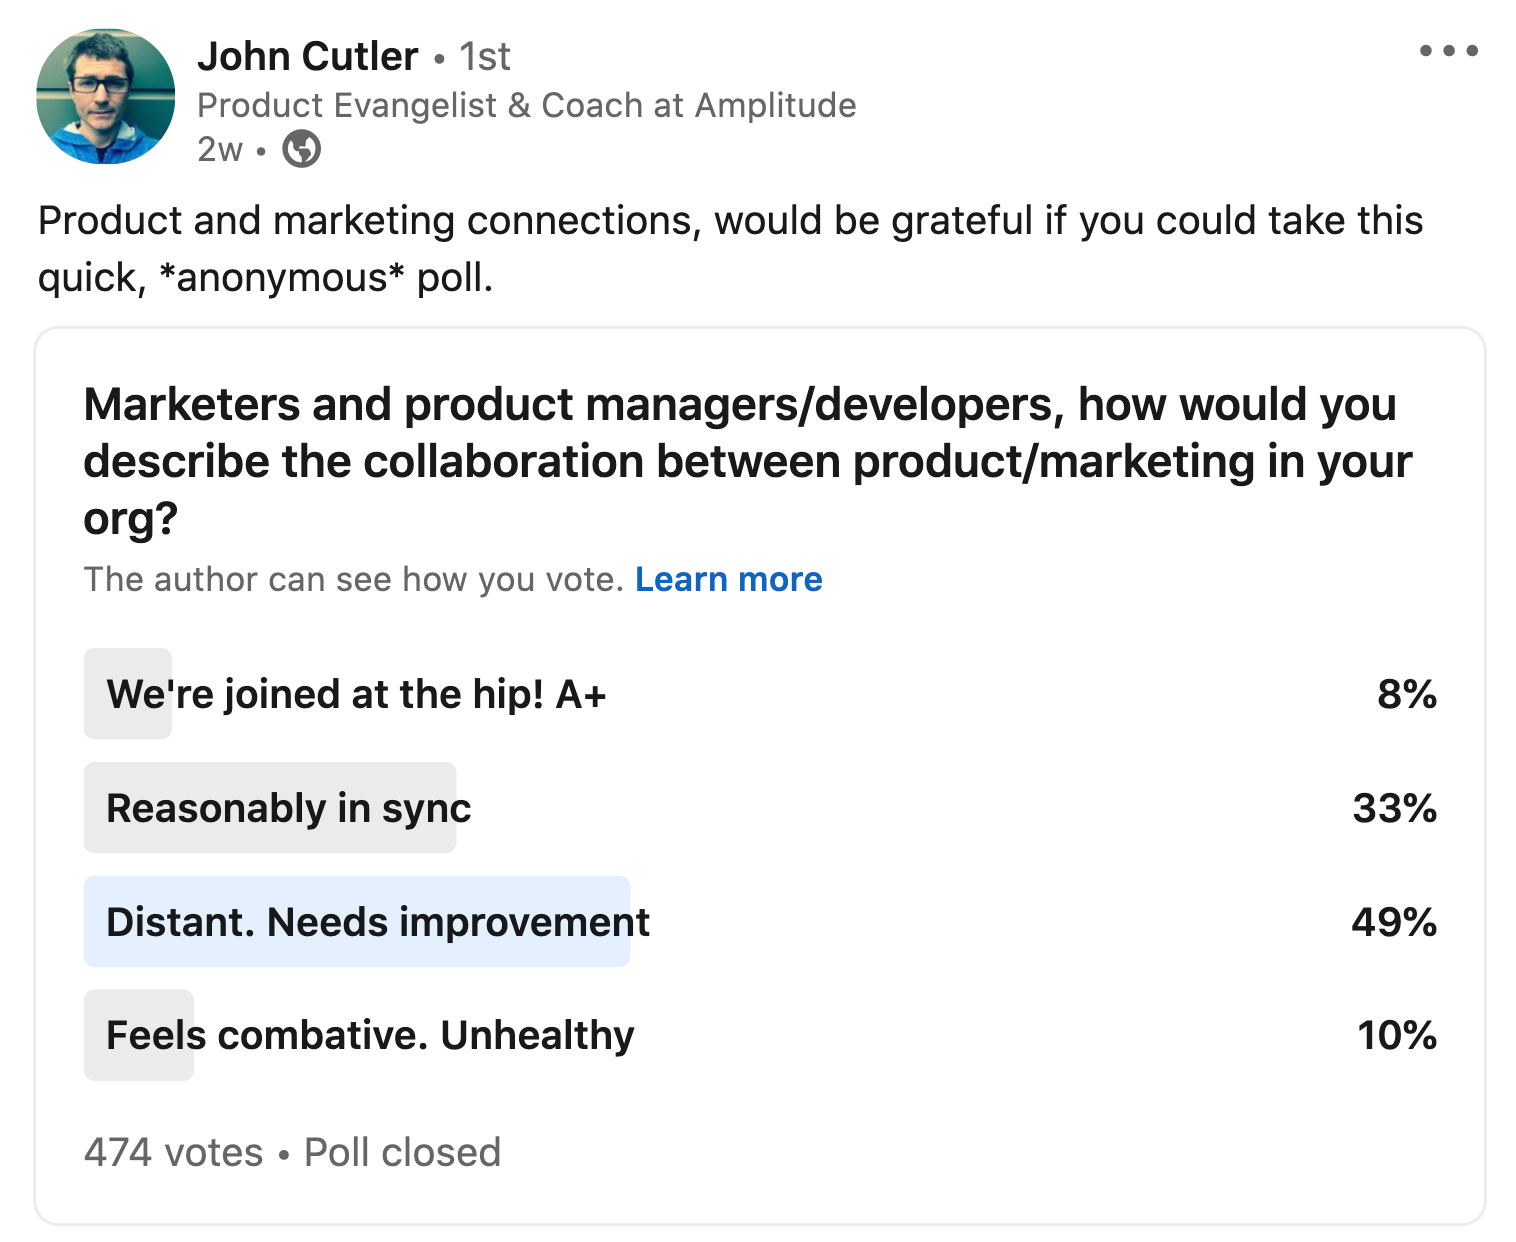 LinkedIn poll: product and marketing collaboration